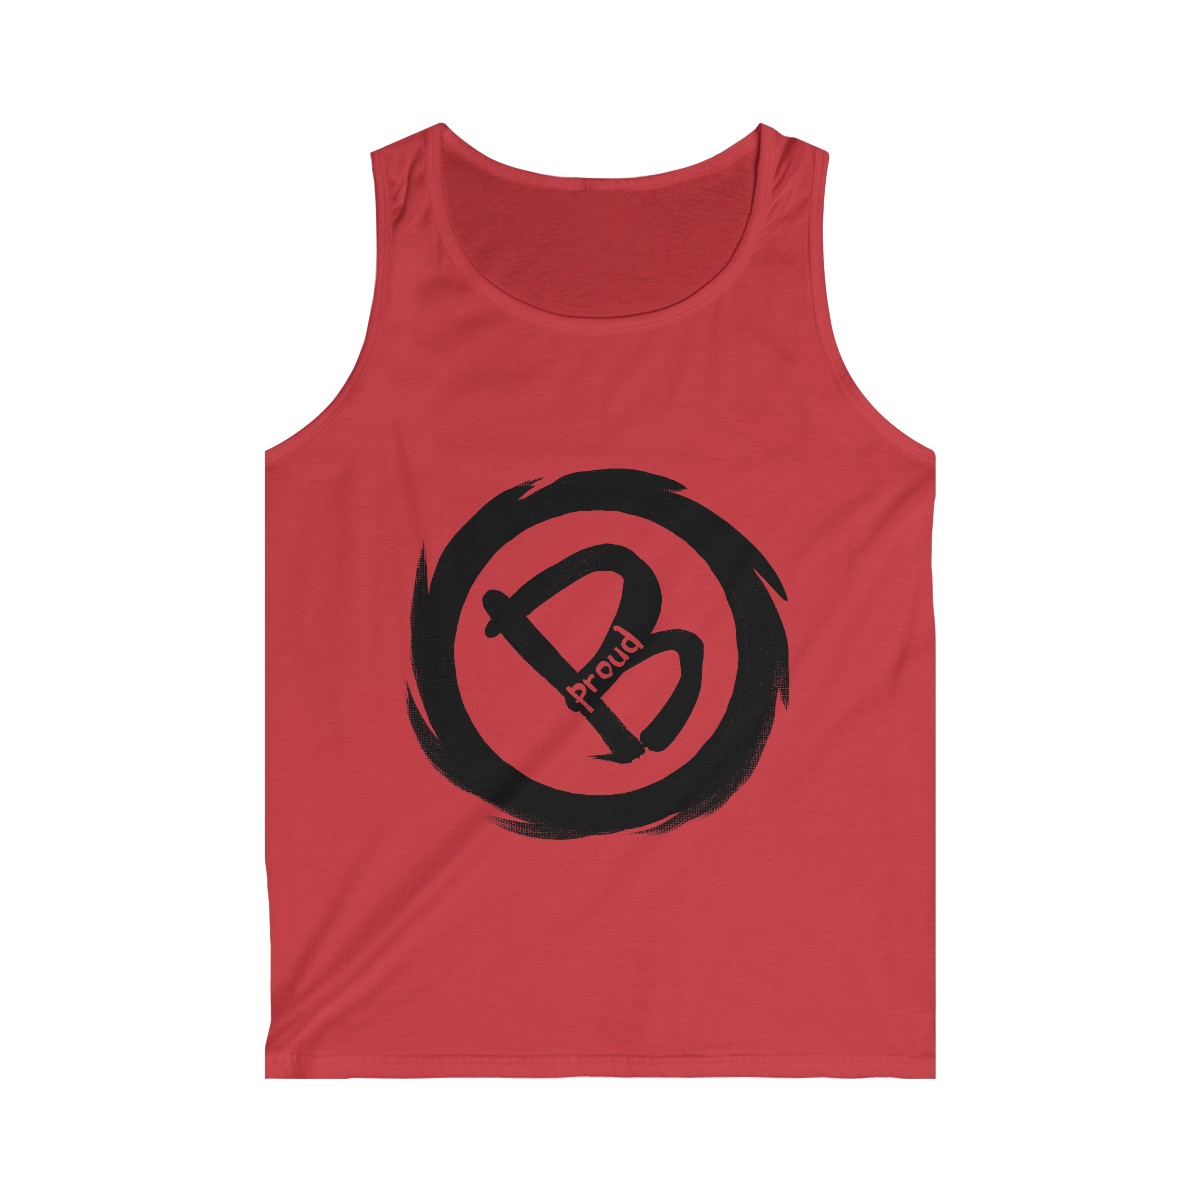 Softstyle Tank Top B proud product main image